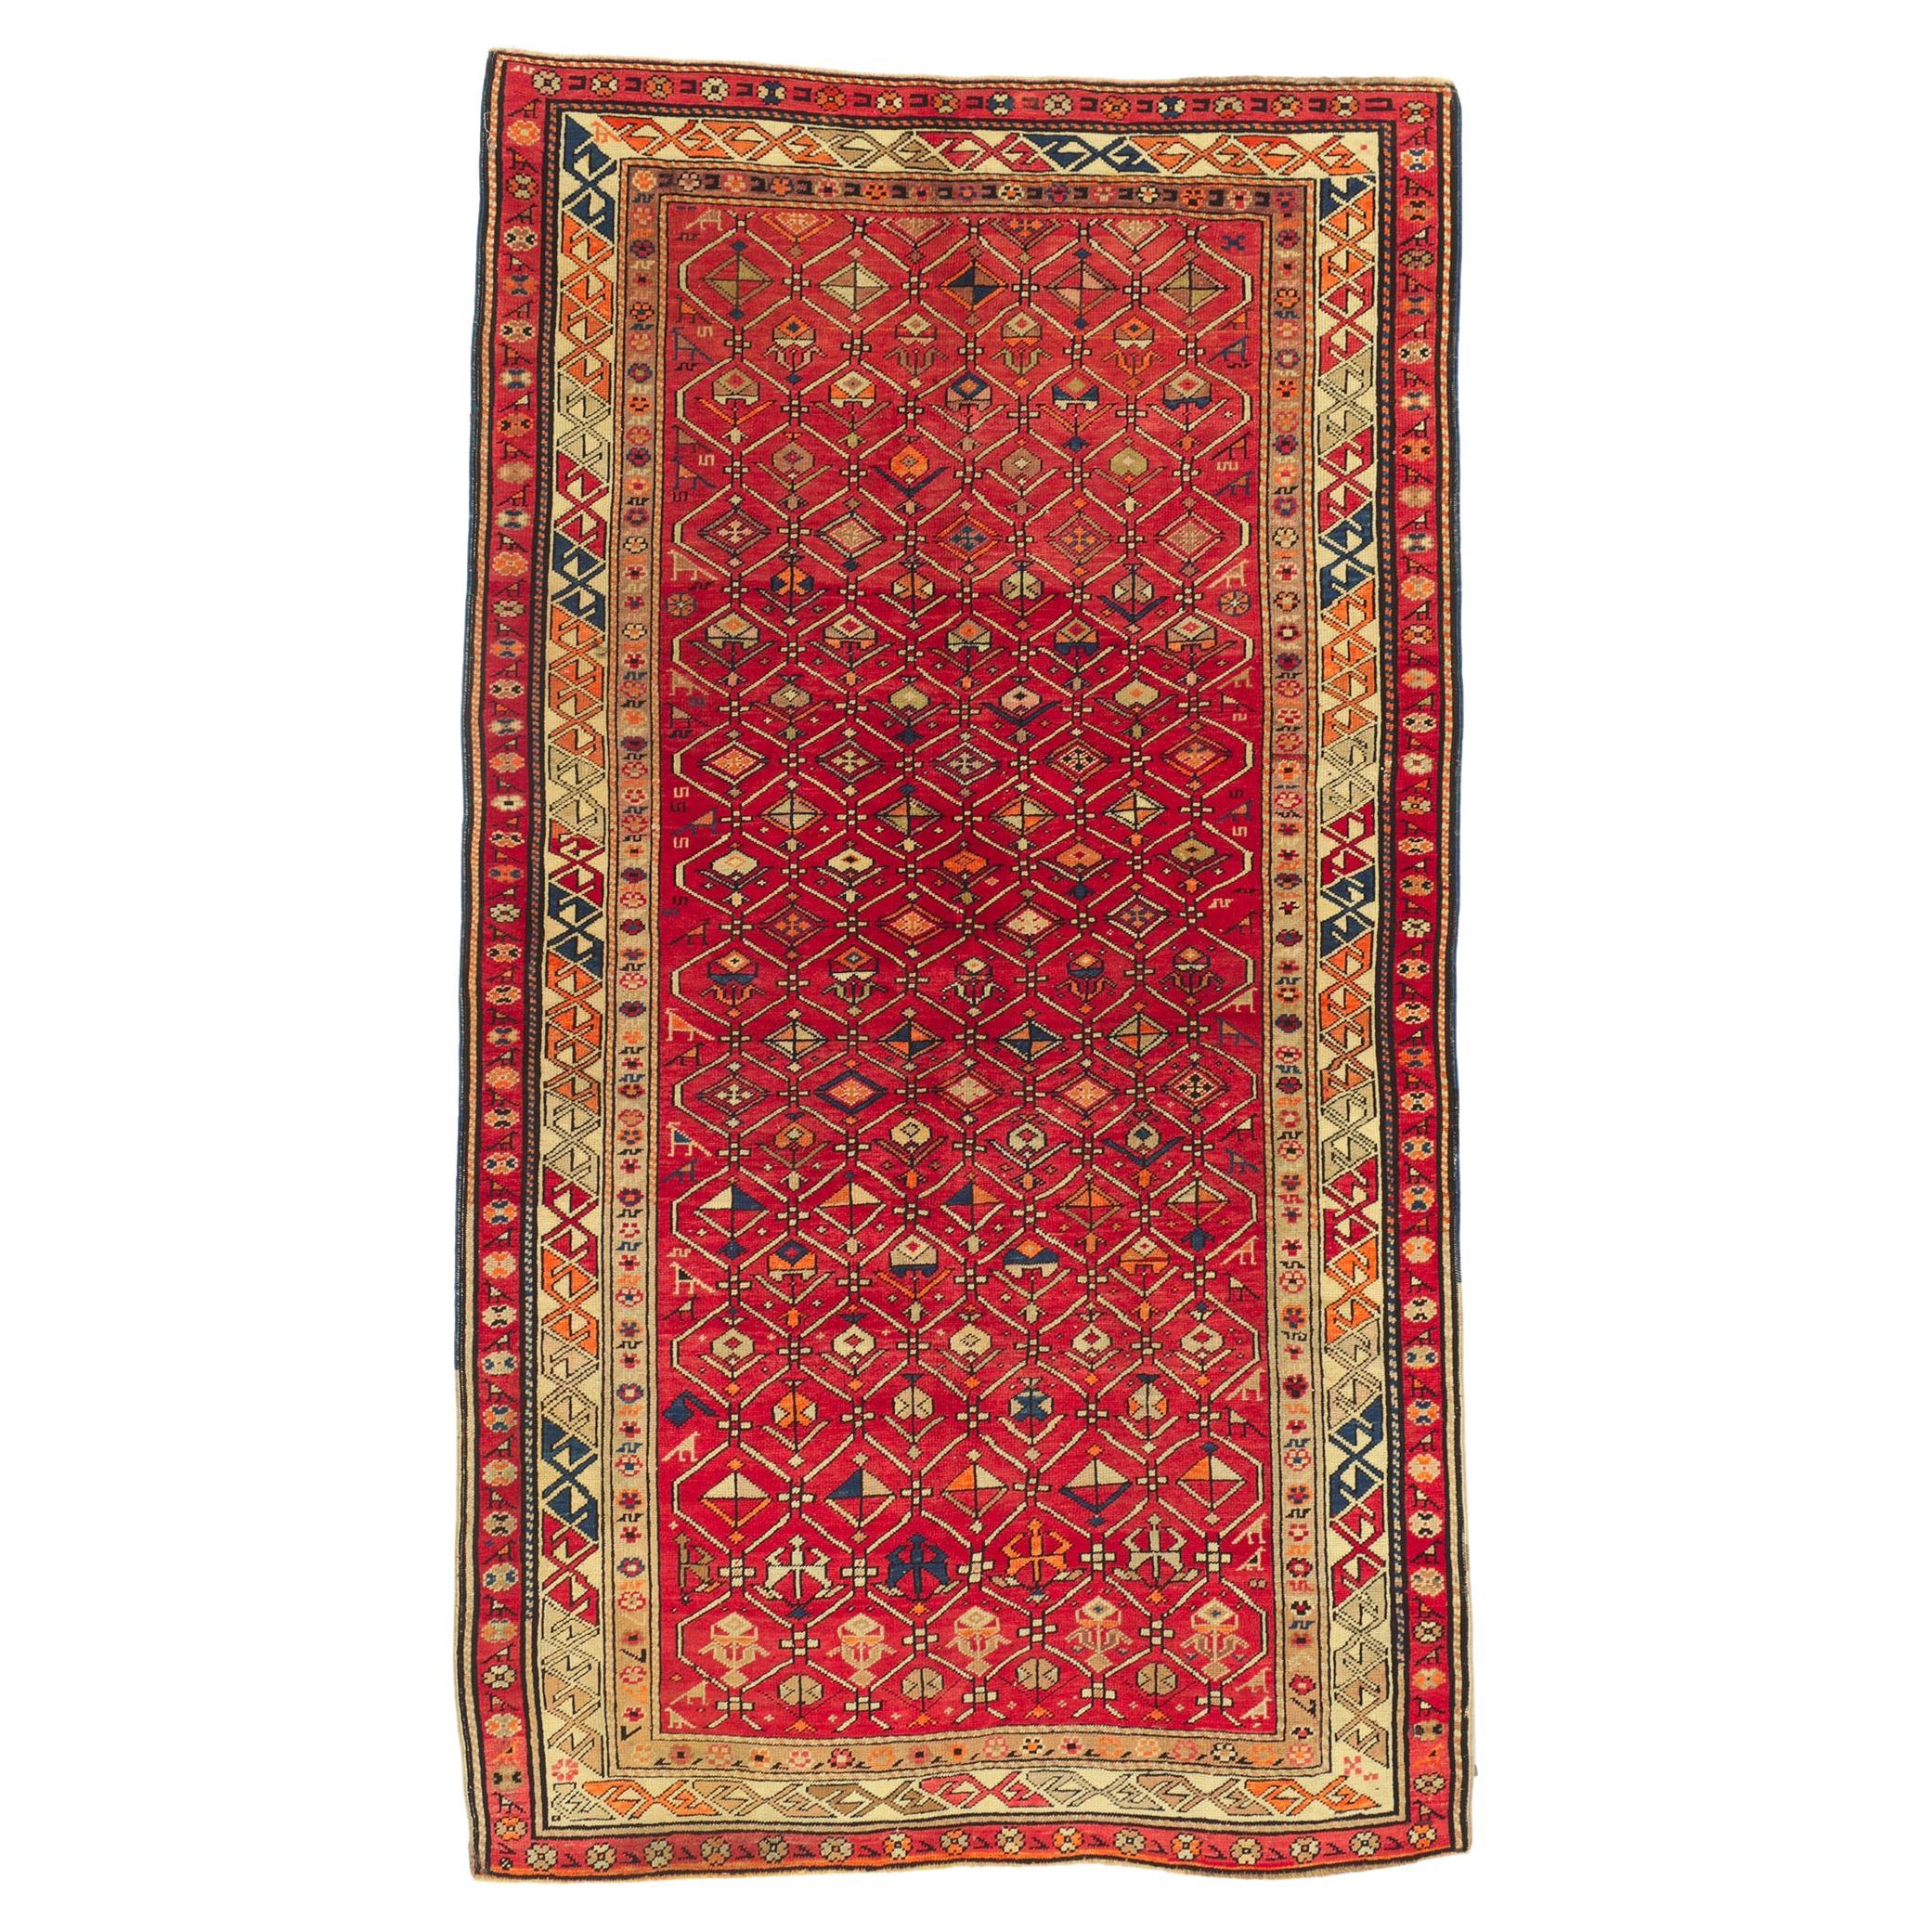 Vintage Turkish Tribal Oushak Rug with Vibrant Earth-Tone Colors